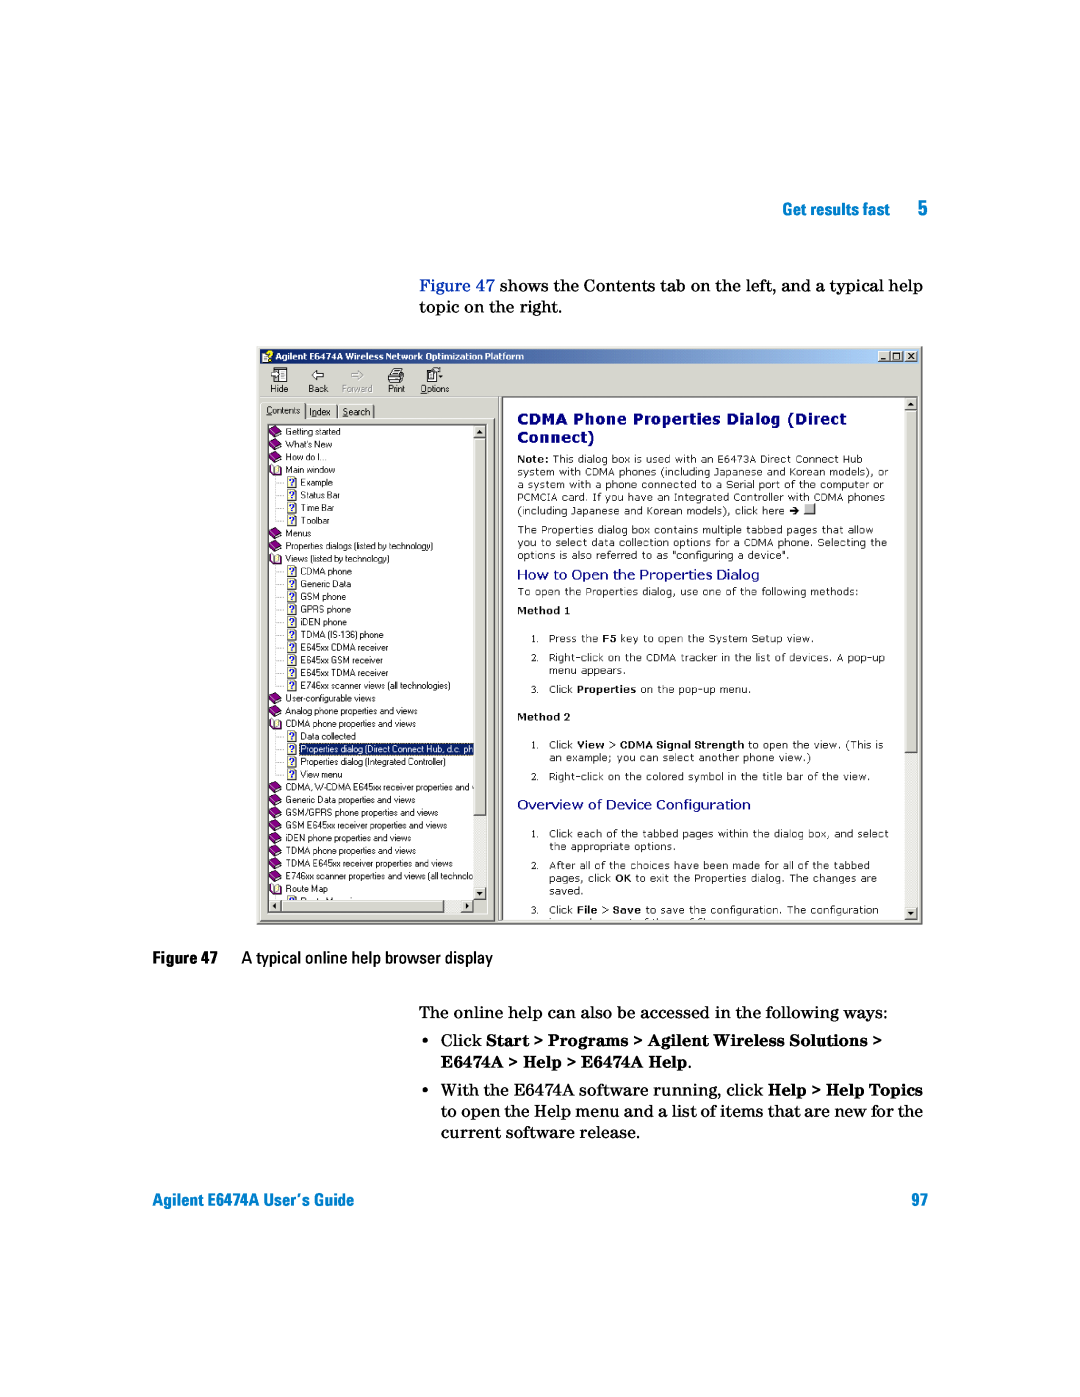 Agilent Technologies manual A typical online help browser display, Agilent E6474A User’s Guide 